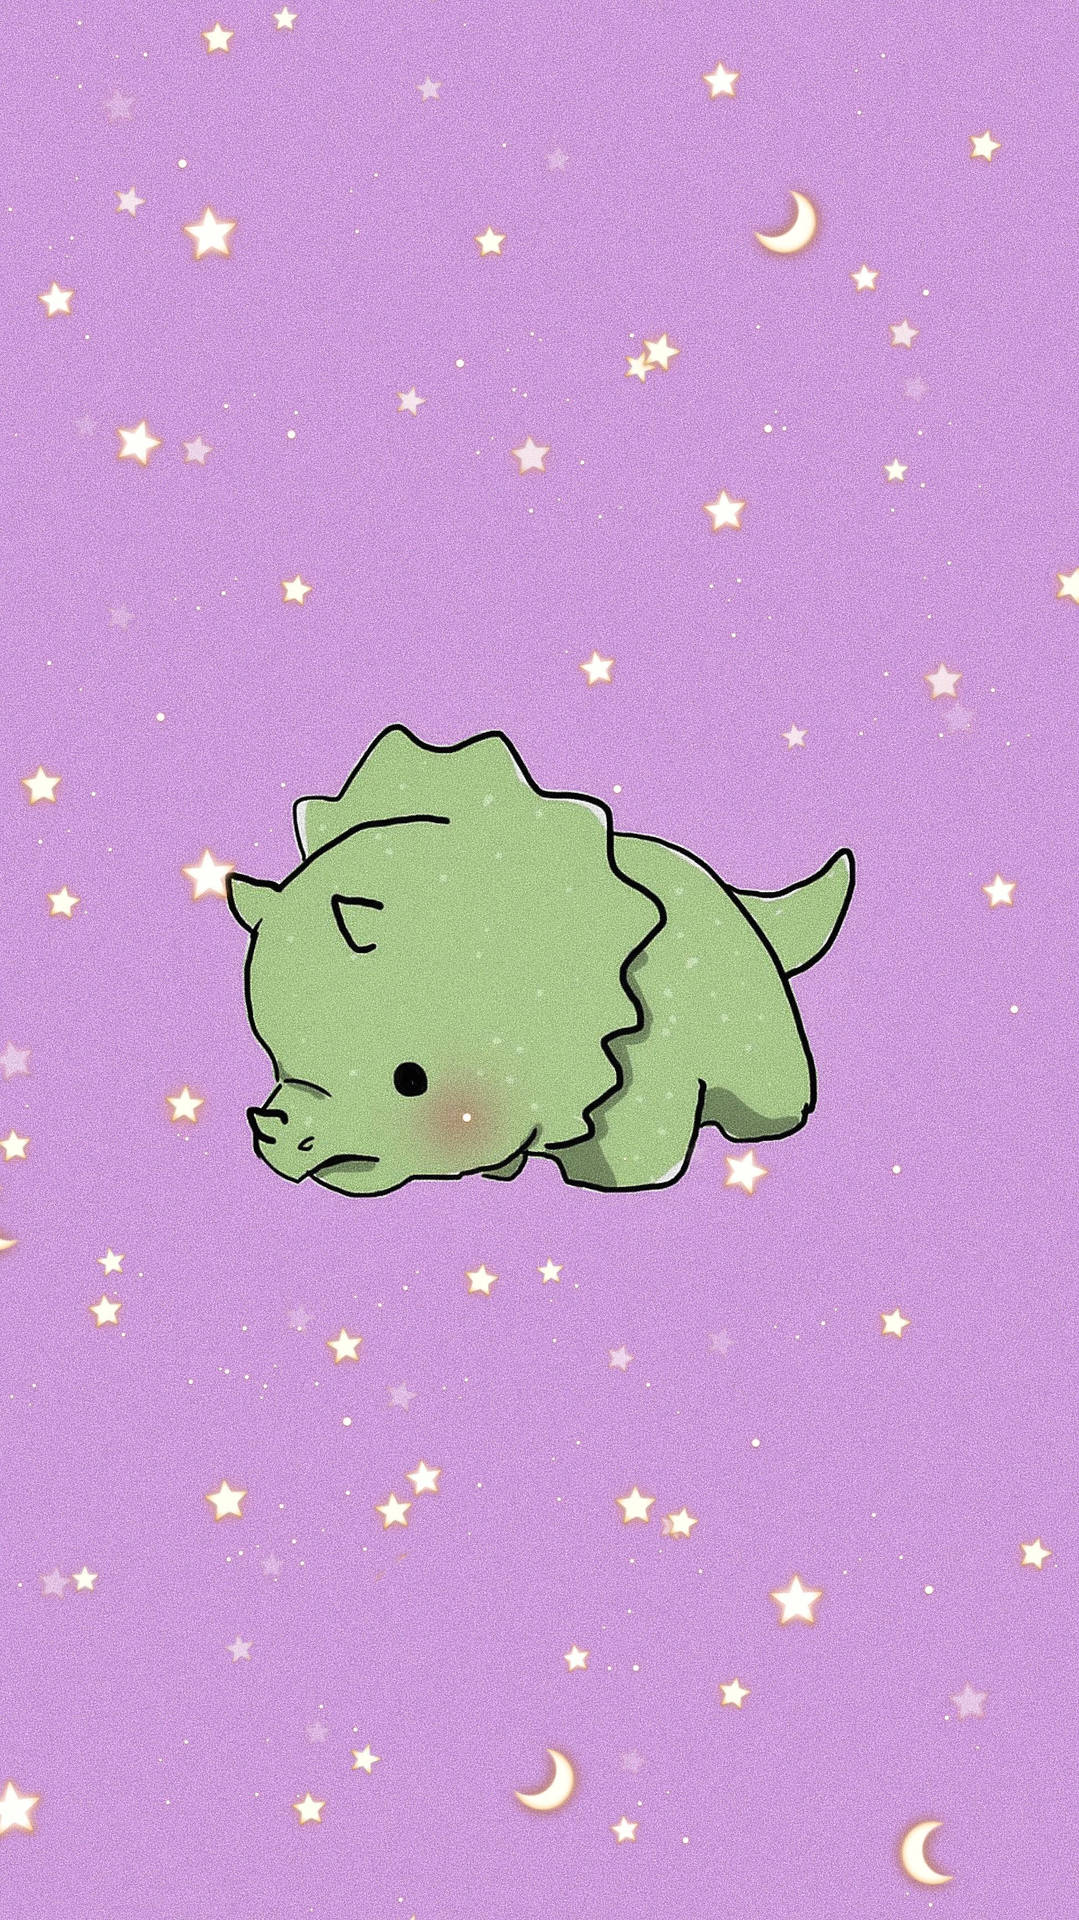 Keep It Cute With This Adorable Dinosaur iPhone Wallpaper! Wallpaper